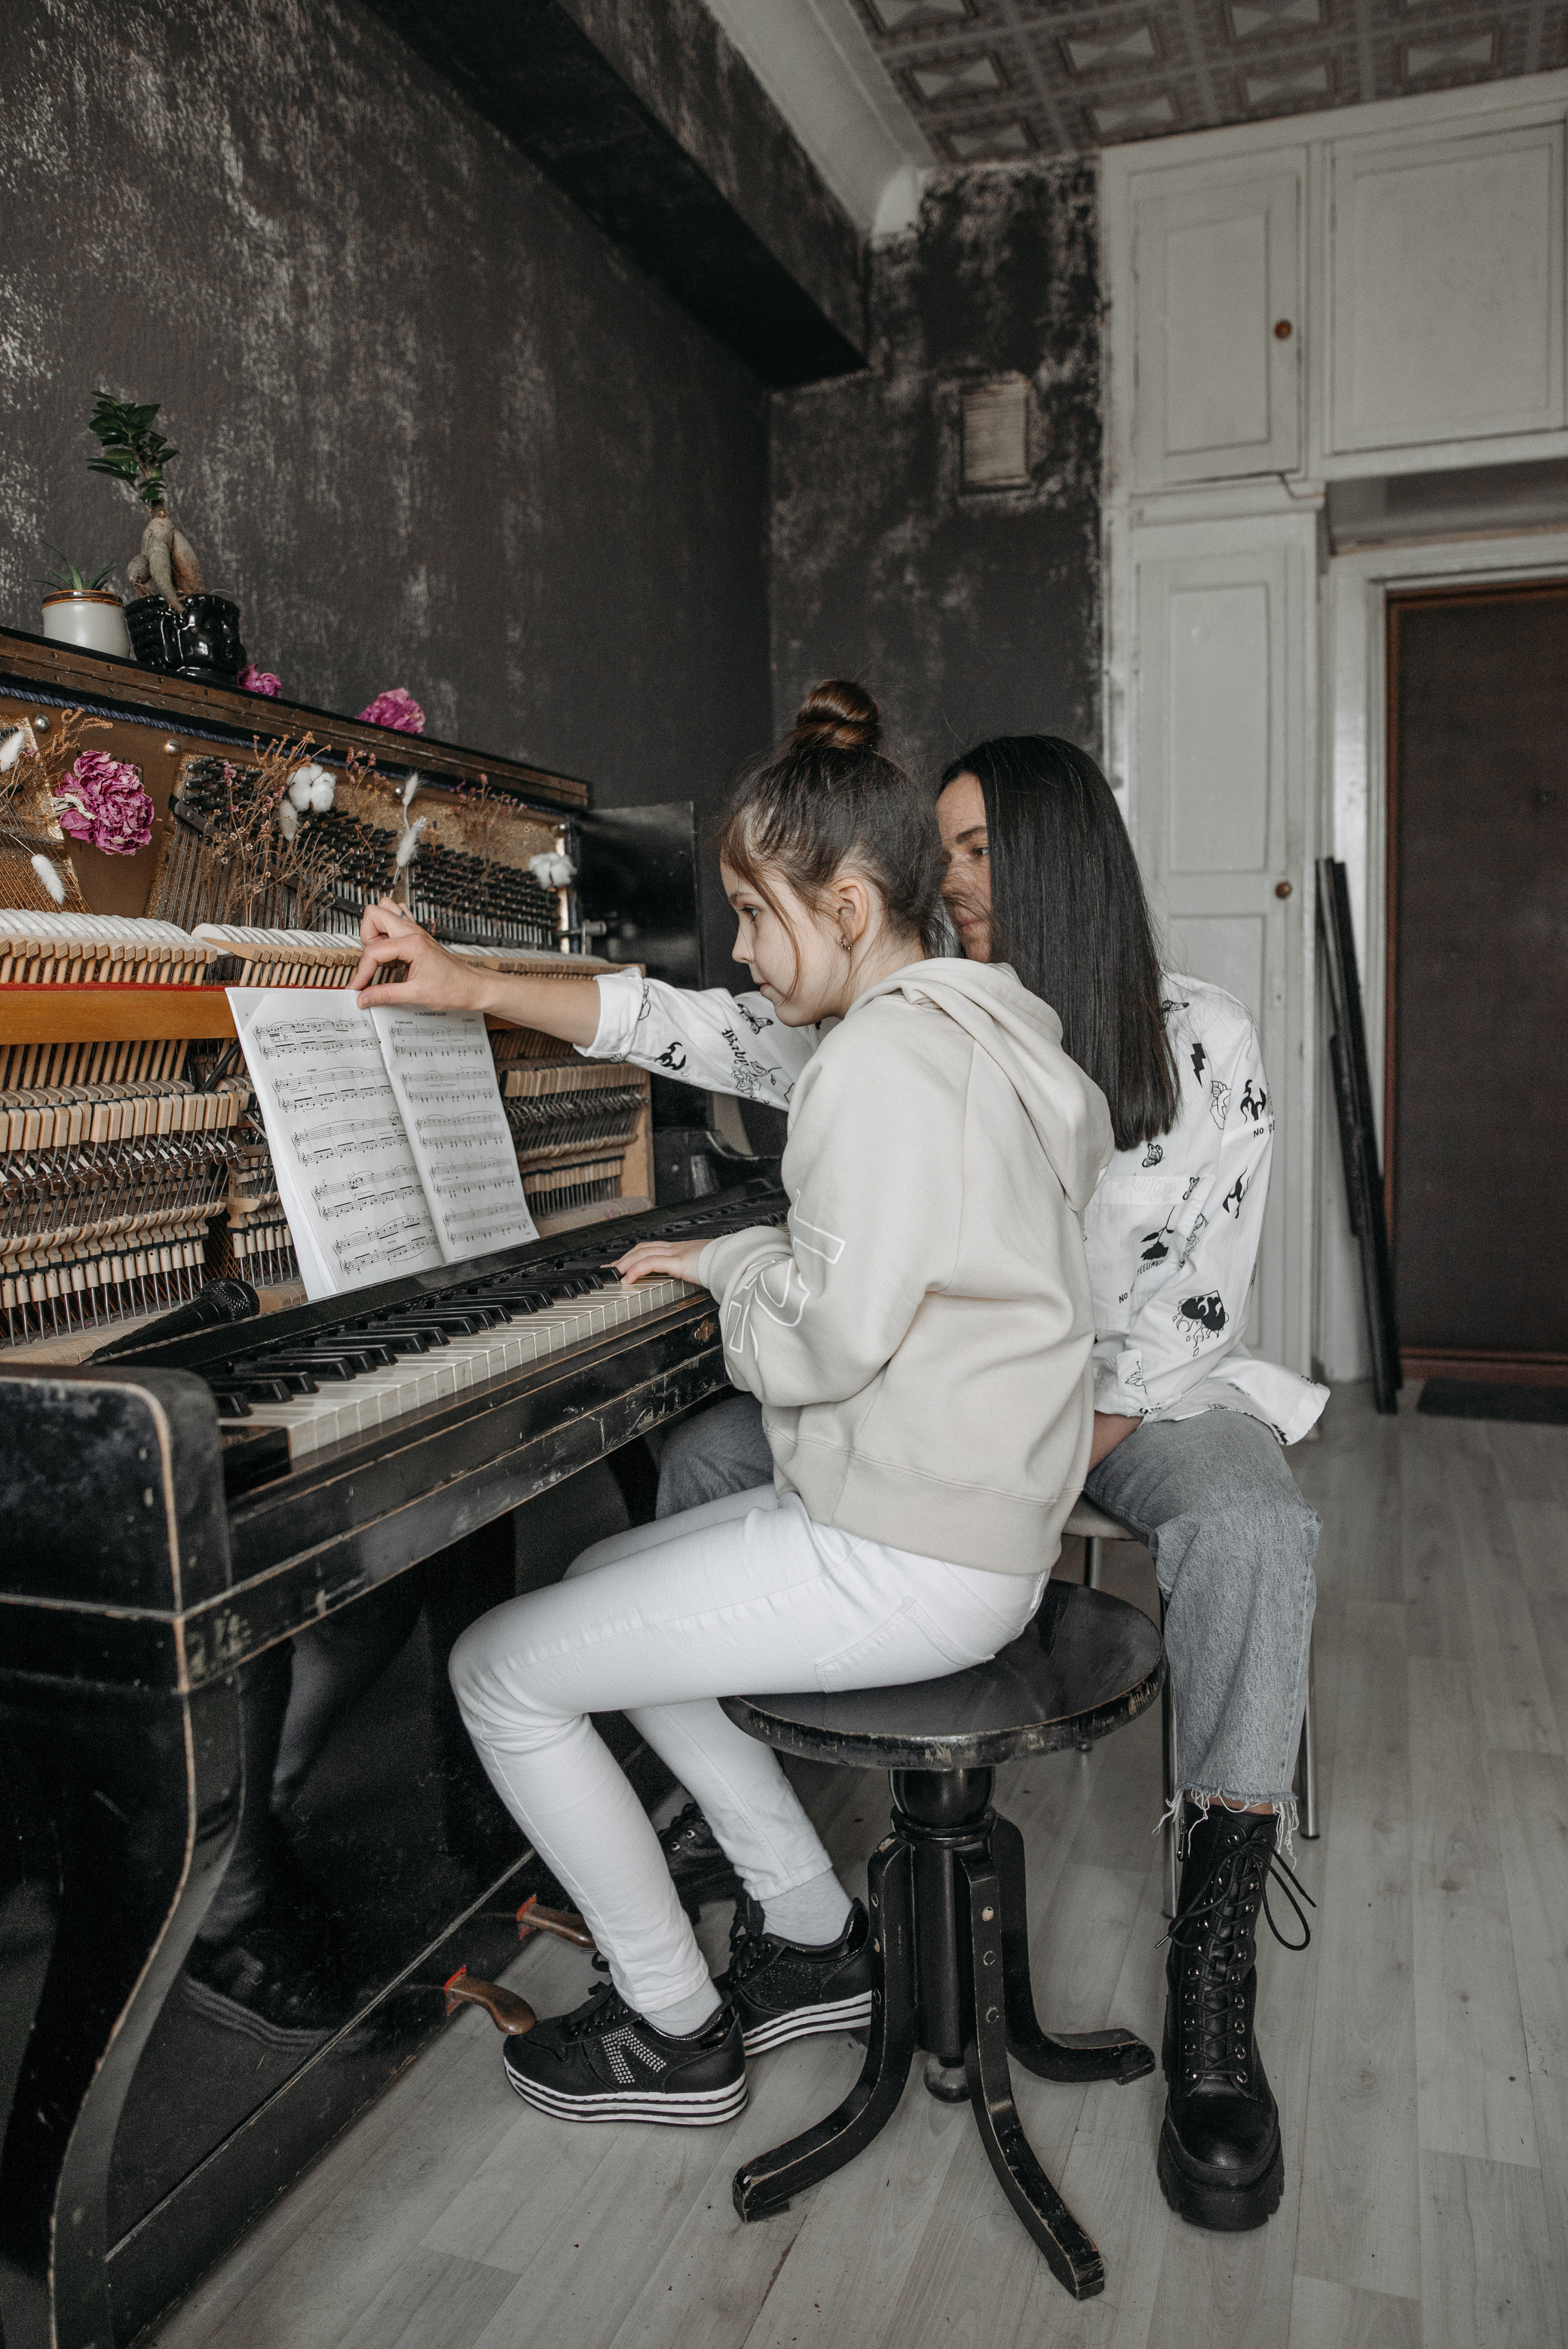 A Girl Playing Piano